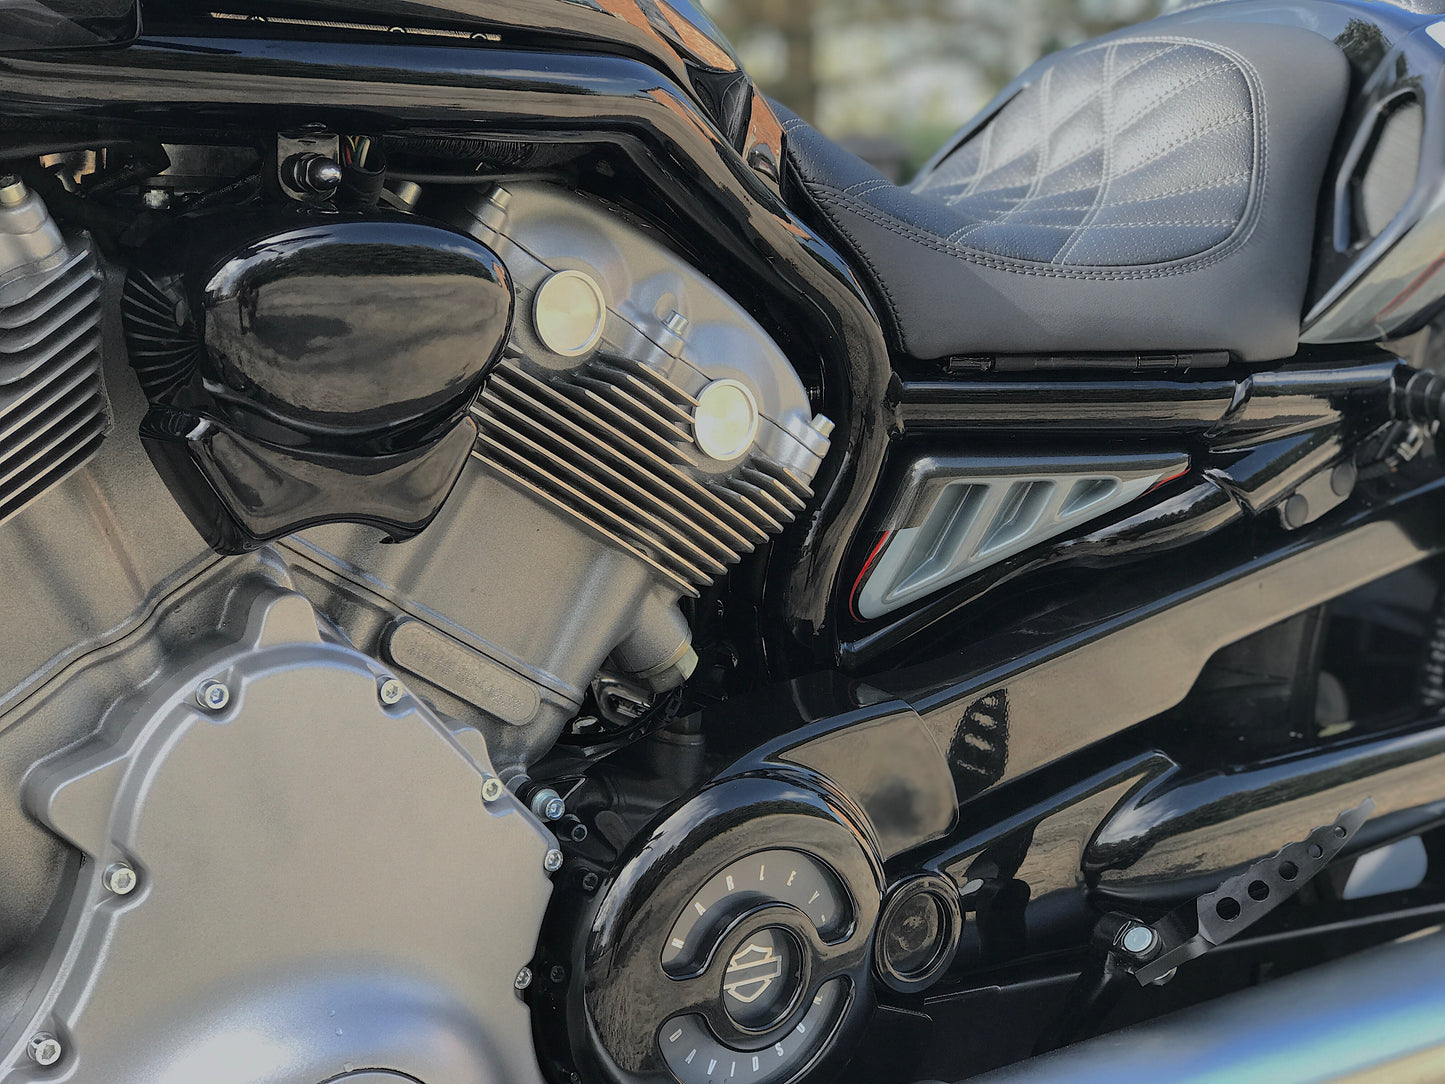 Zoomed Harley Davidson motorcycle with Killer Custom V-Rod "Mustang" tank frame side covers from the side